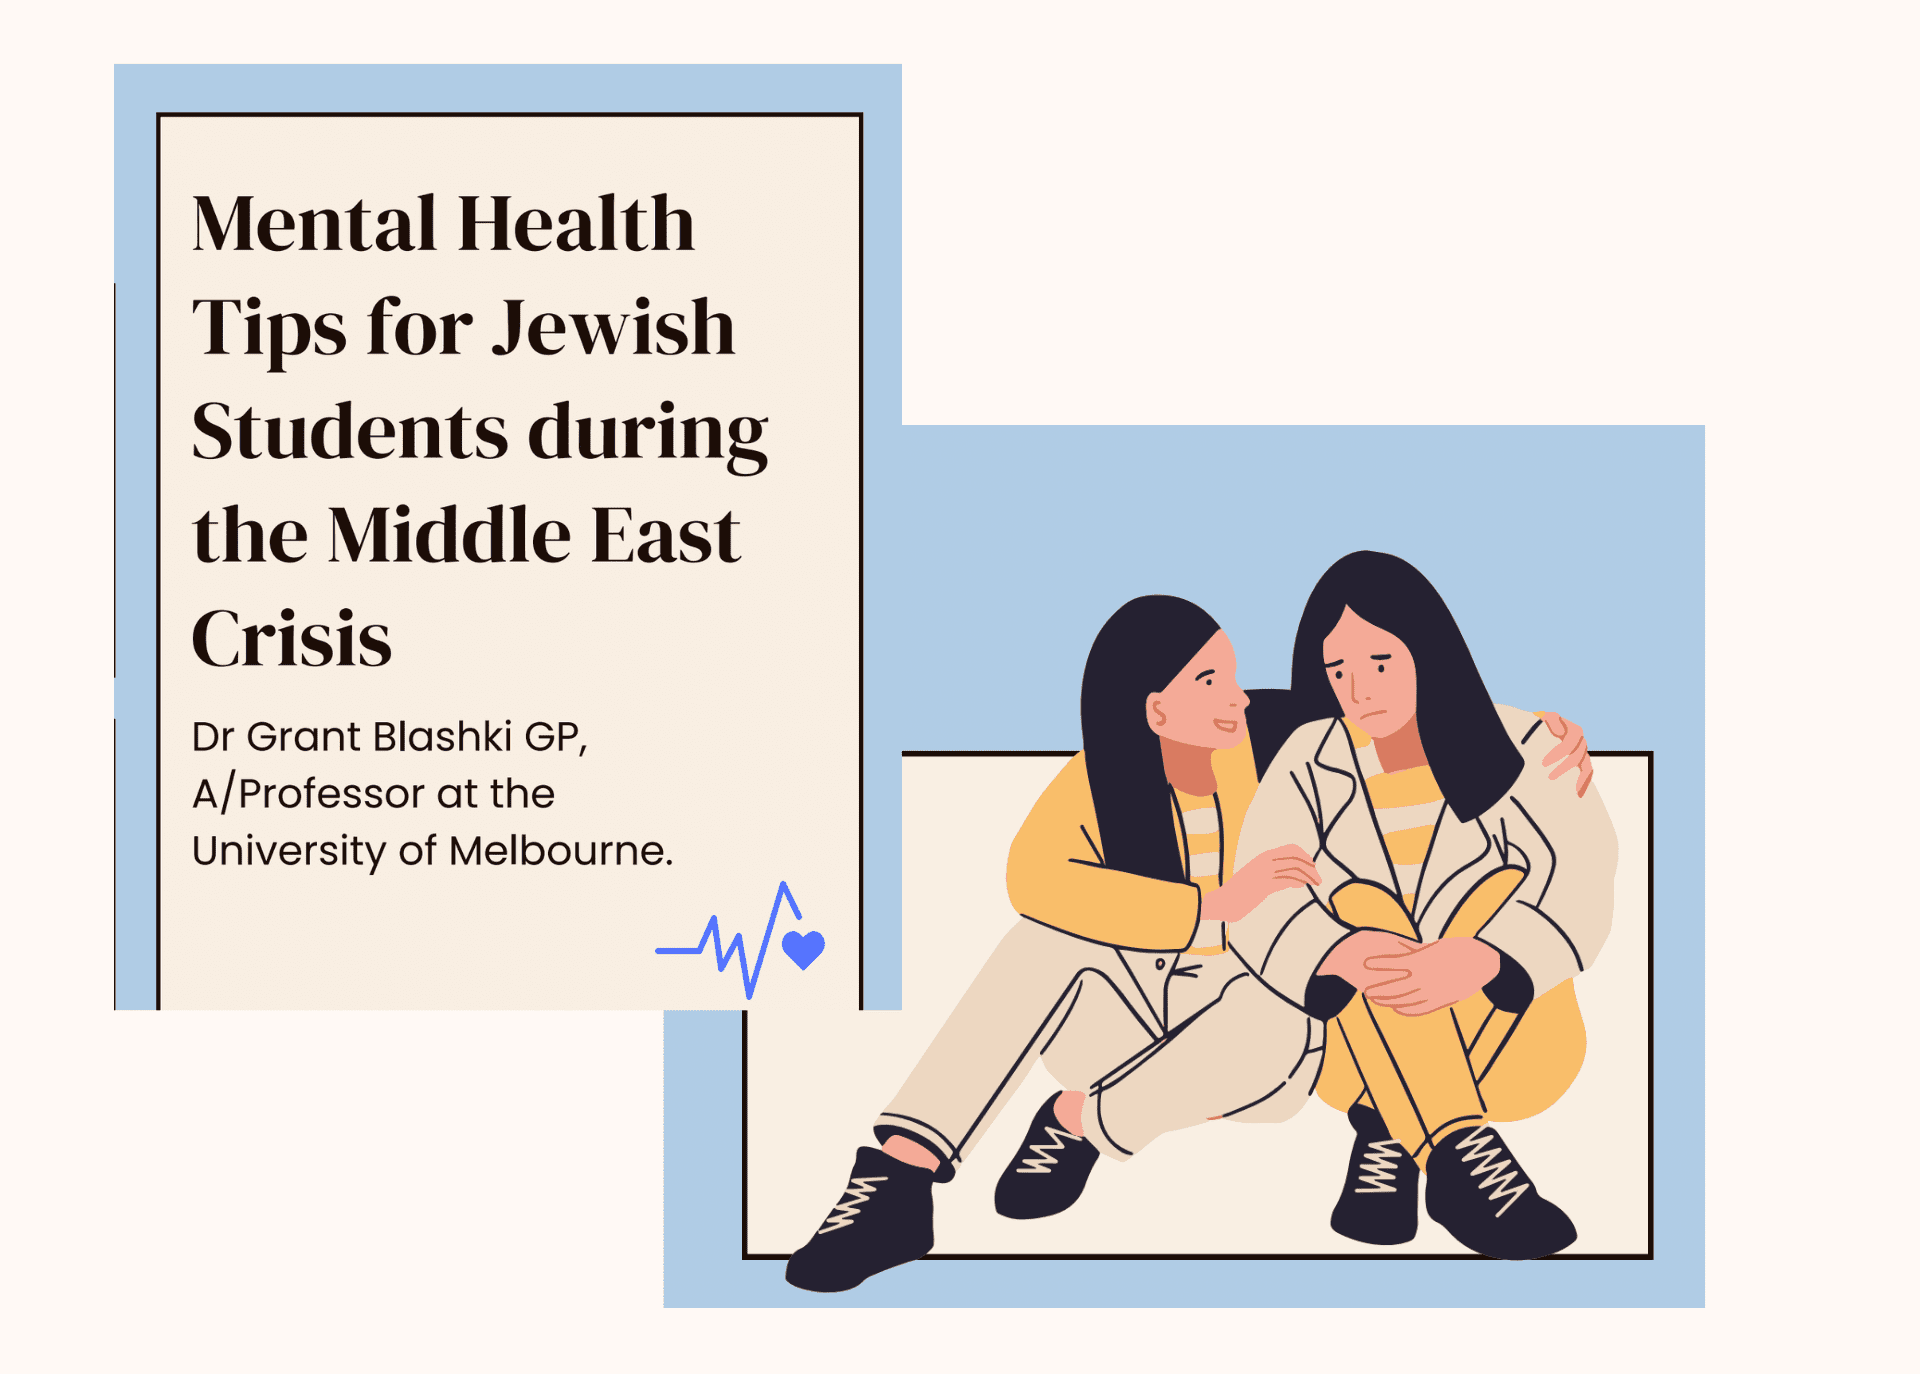 Mental Health Tips for Jewish Students during the Middle East Crisis